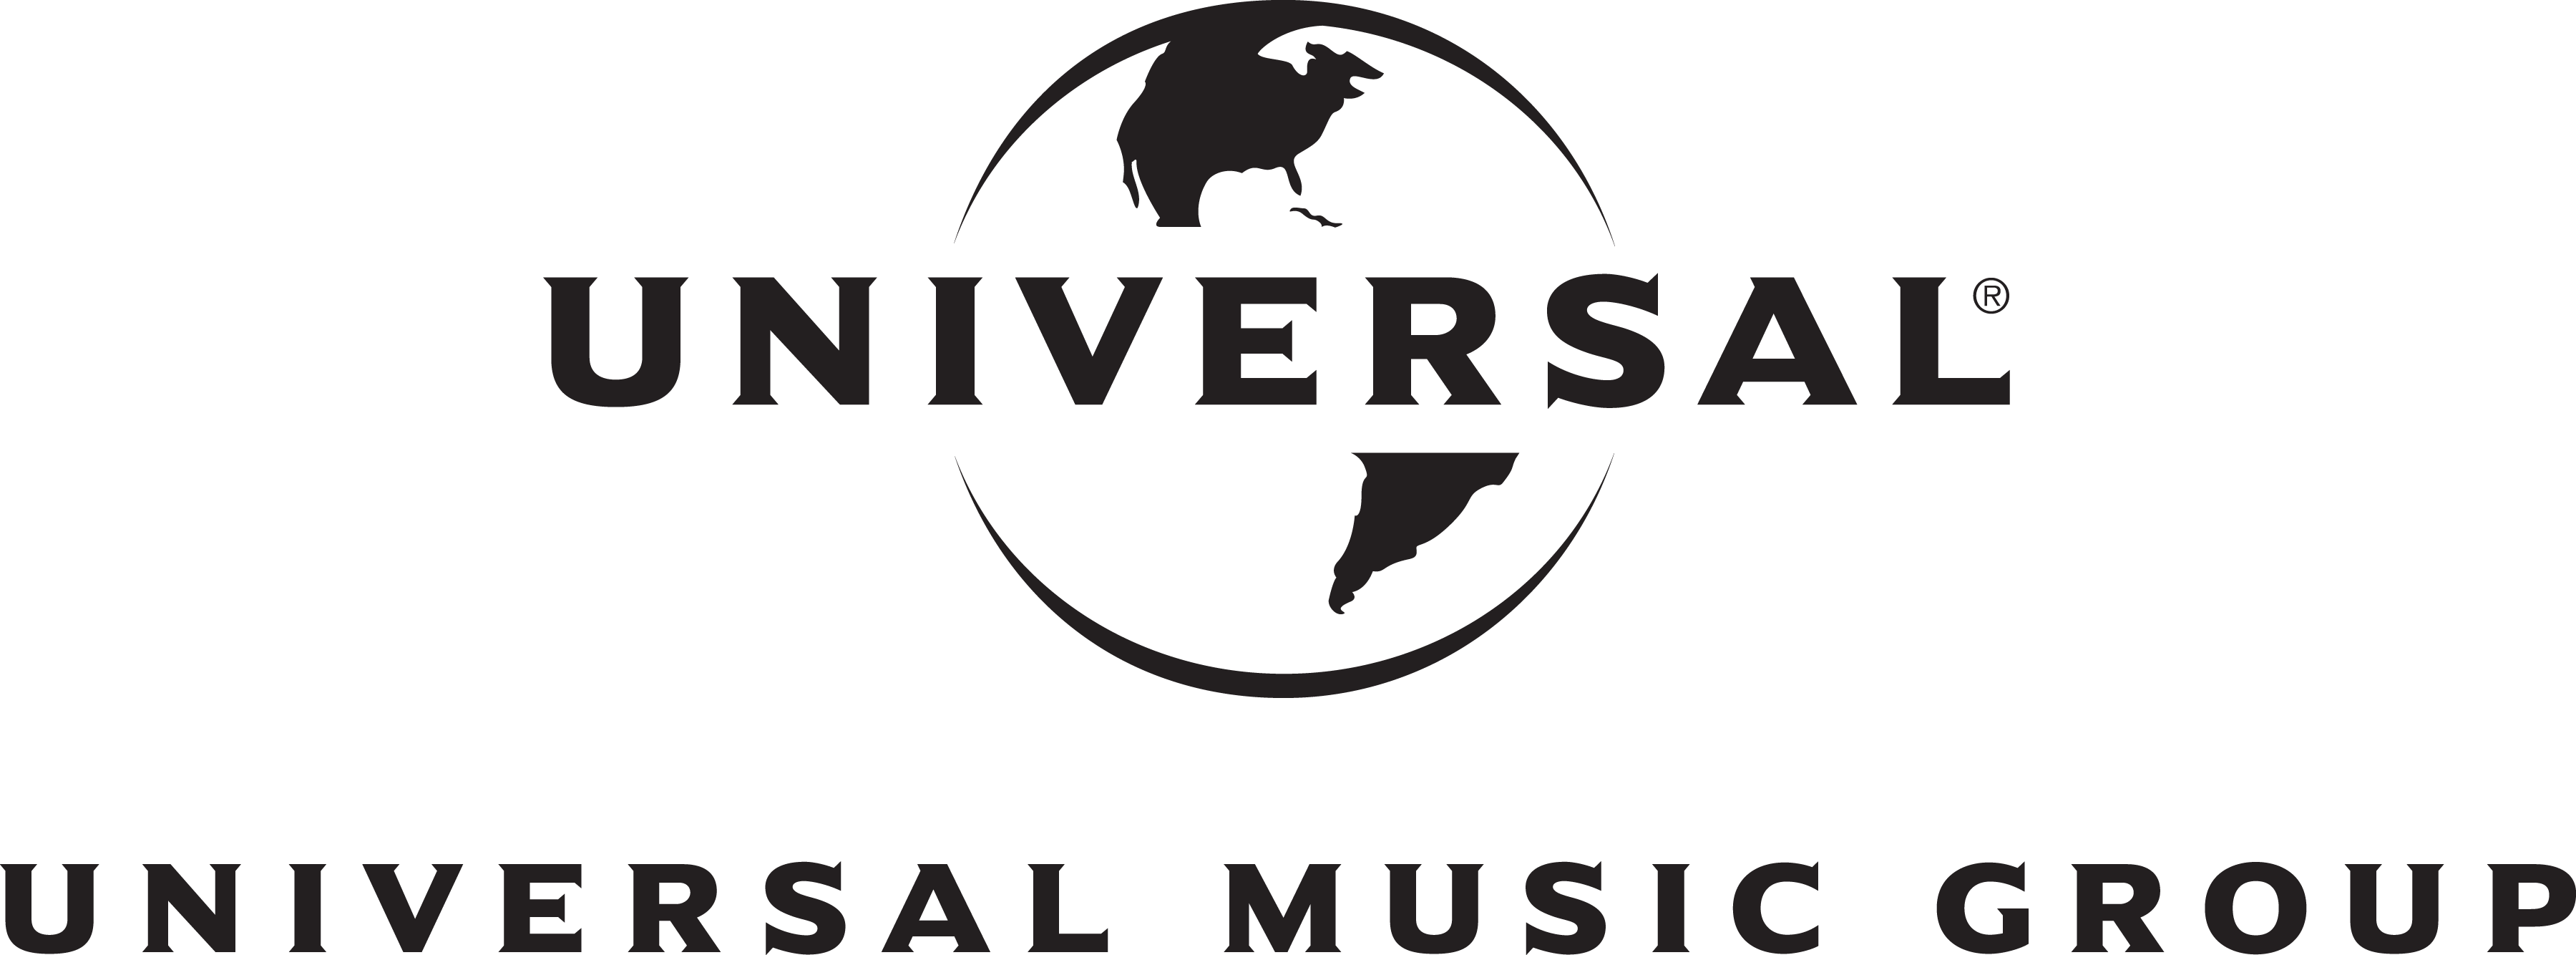 title Get used to disinfect UNIVERSAL MUSIC GROUP BECOMES THE PERMANENT HOME OF FRANK ZAPPA ESTATE - UMG